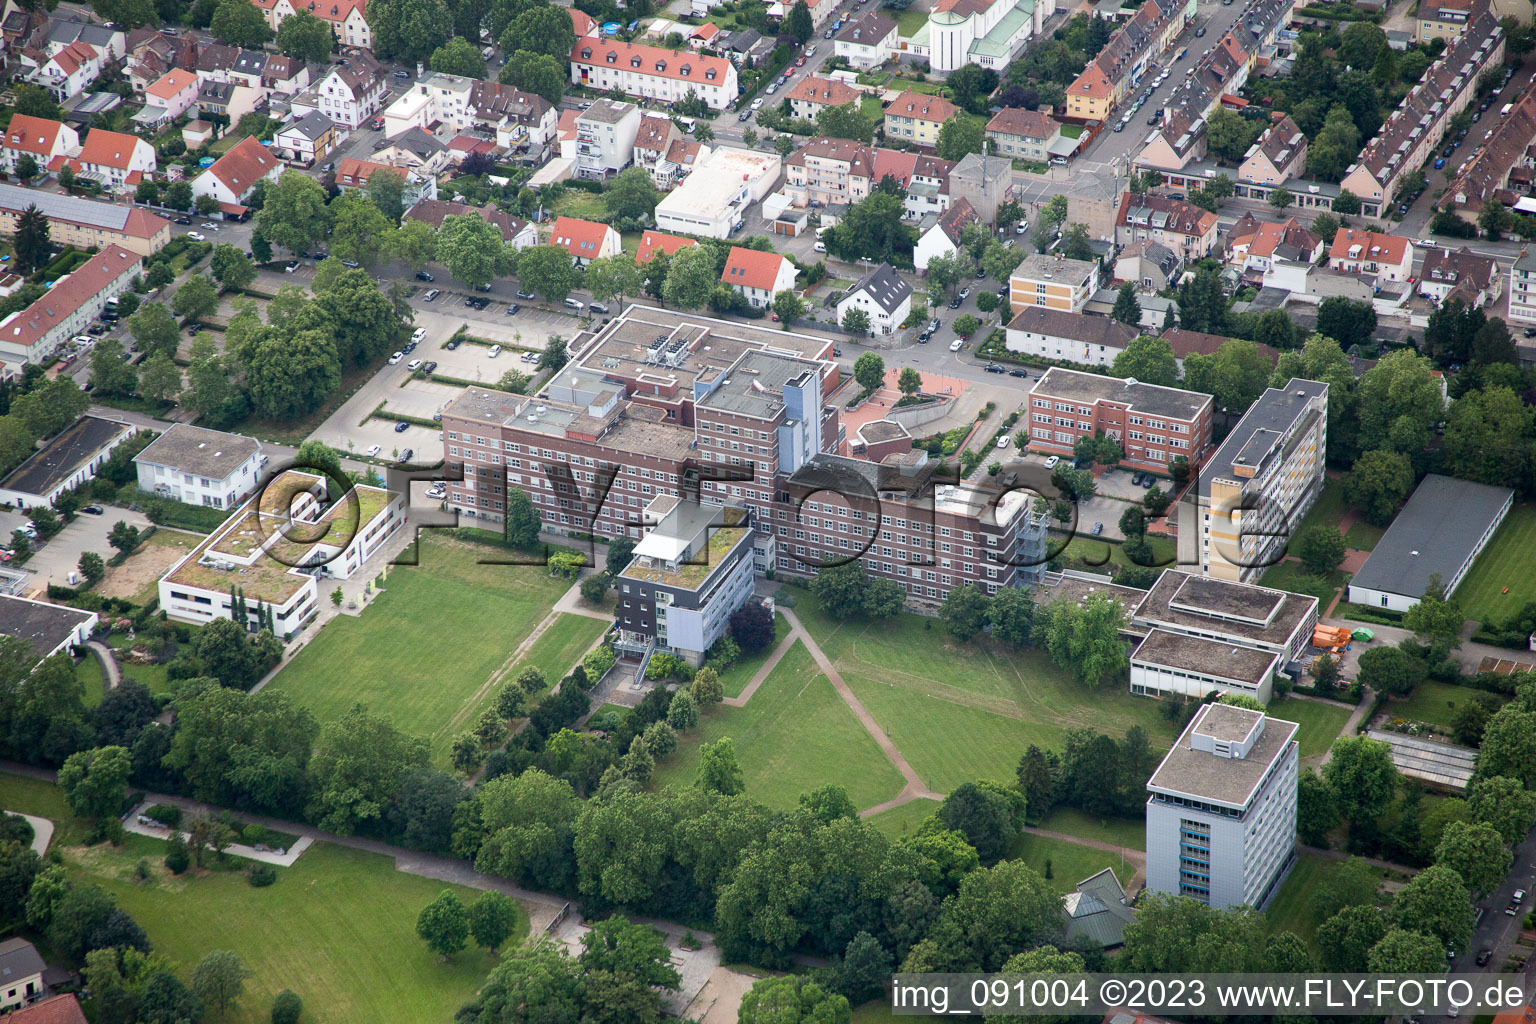 St. Mary's Hospital in the district Gartenstadt in Ludwigshafen am Rhein in the state Rhineland-Palatinate, Germany